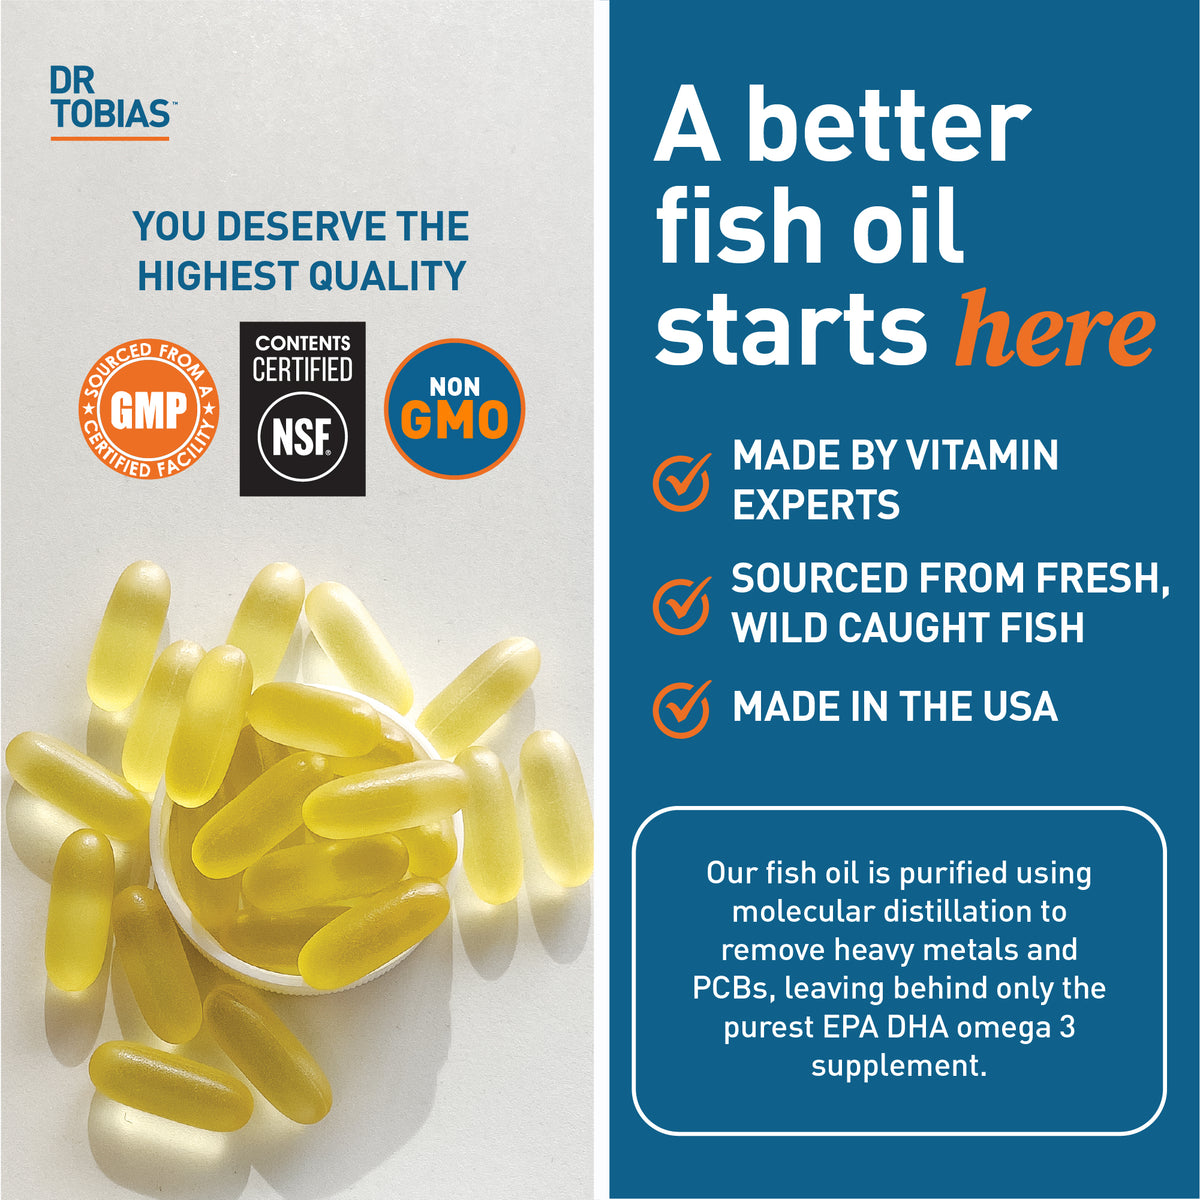 a better fish oil starts here